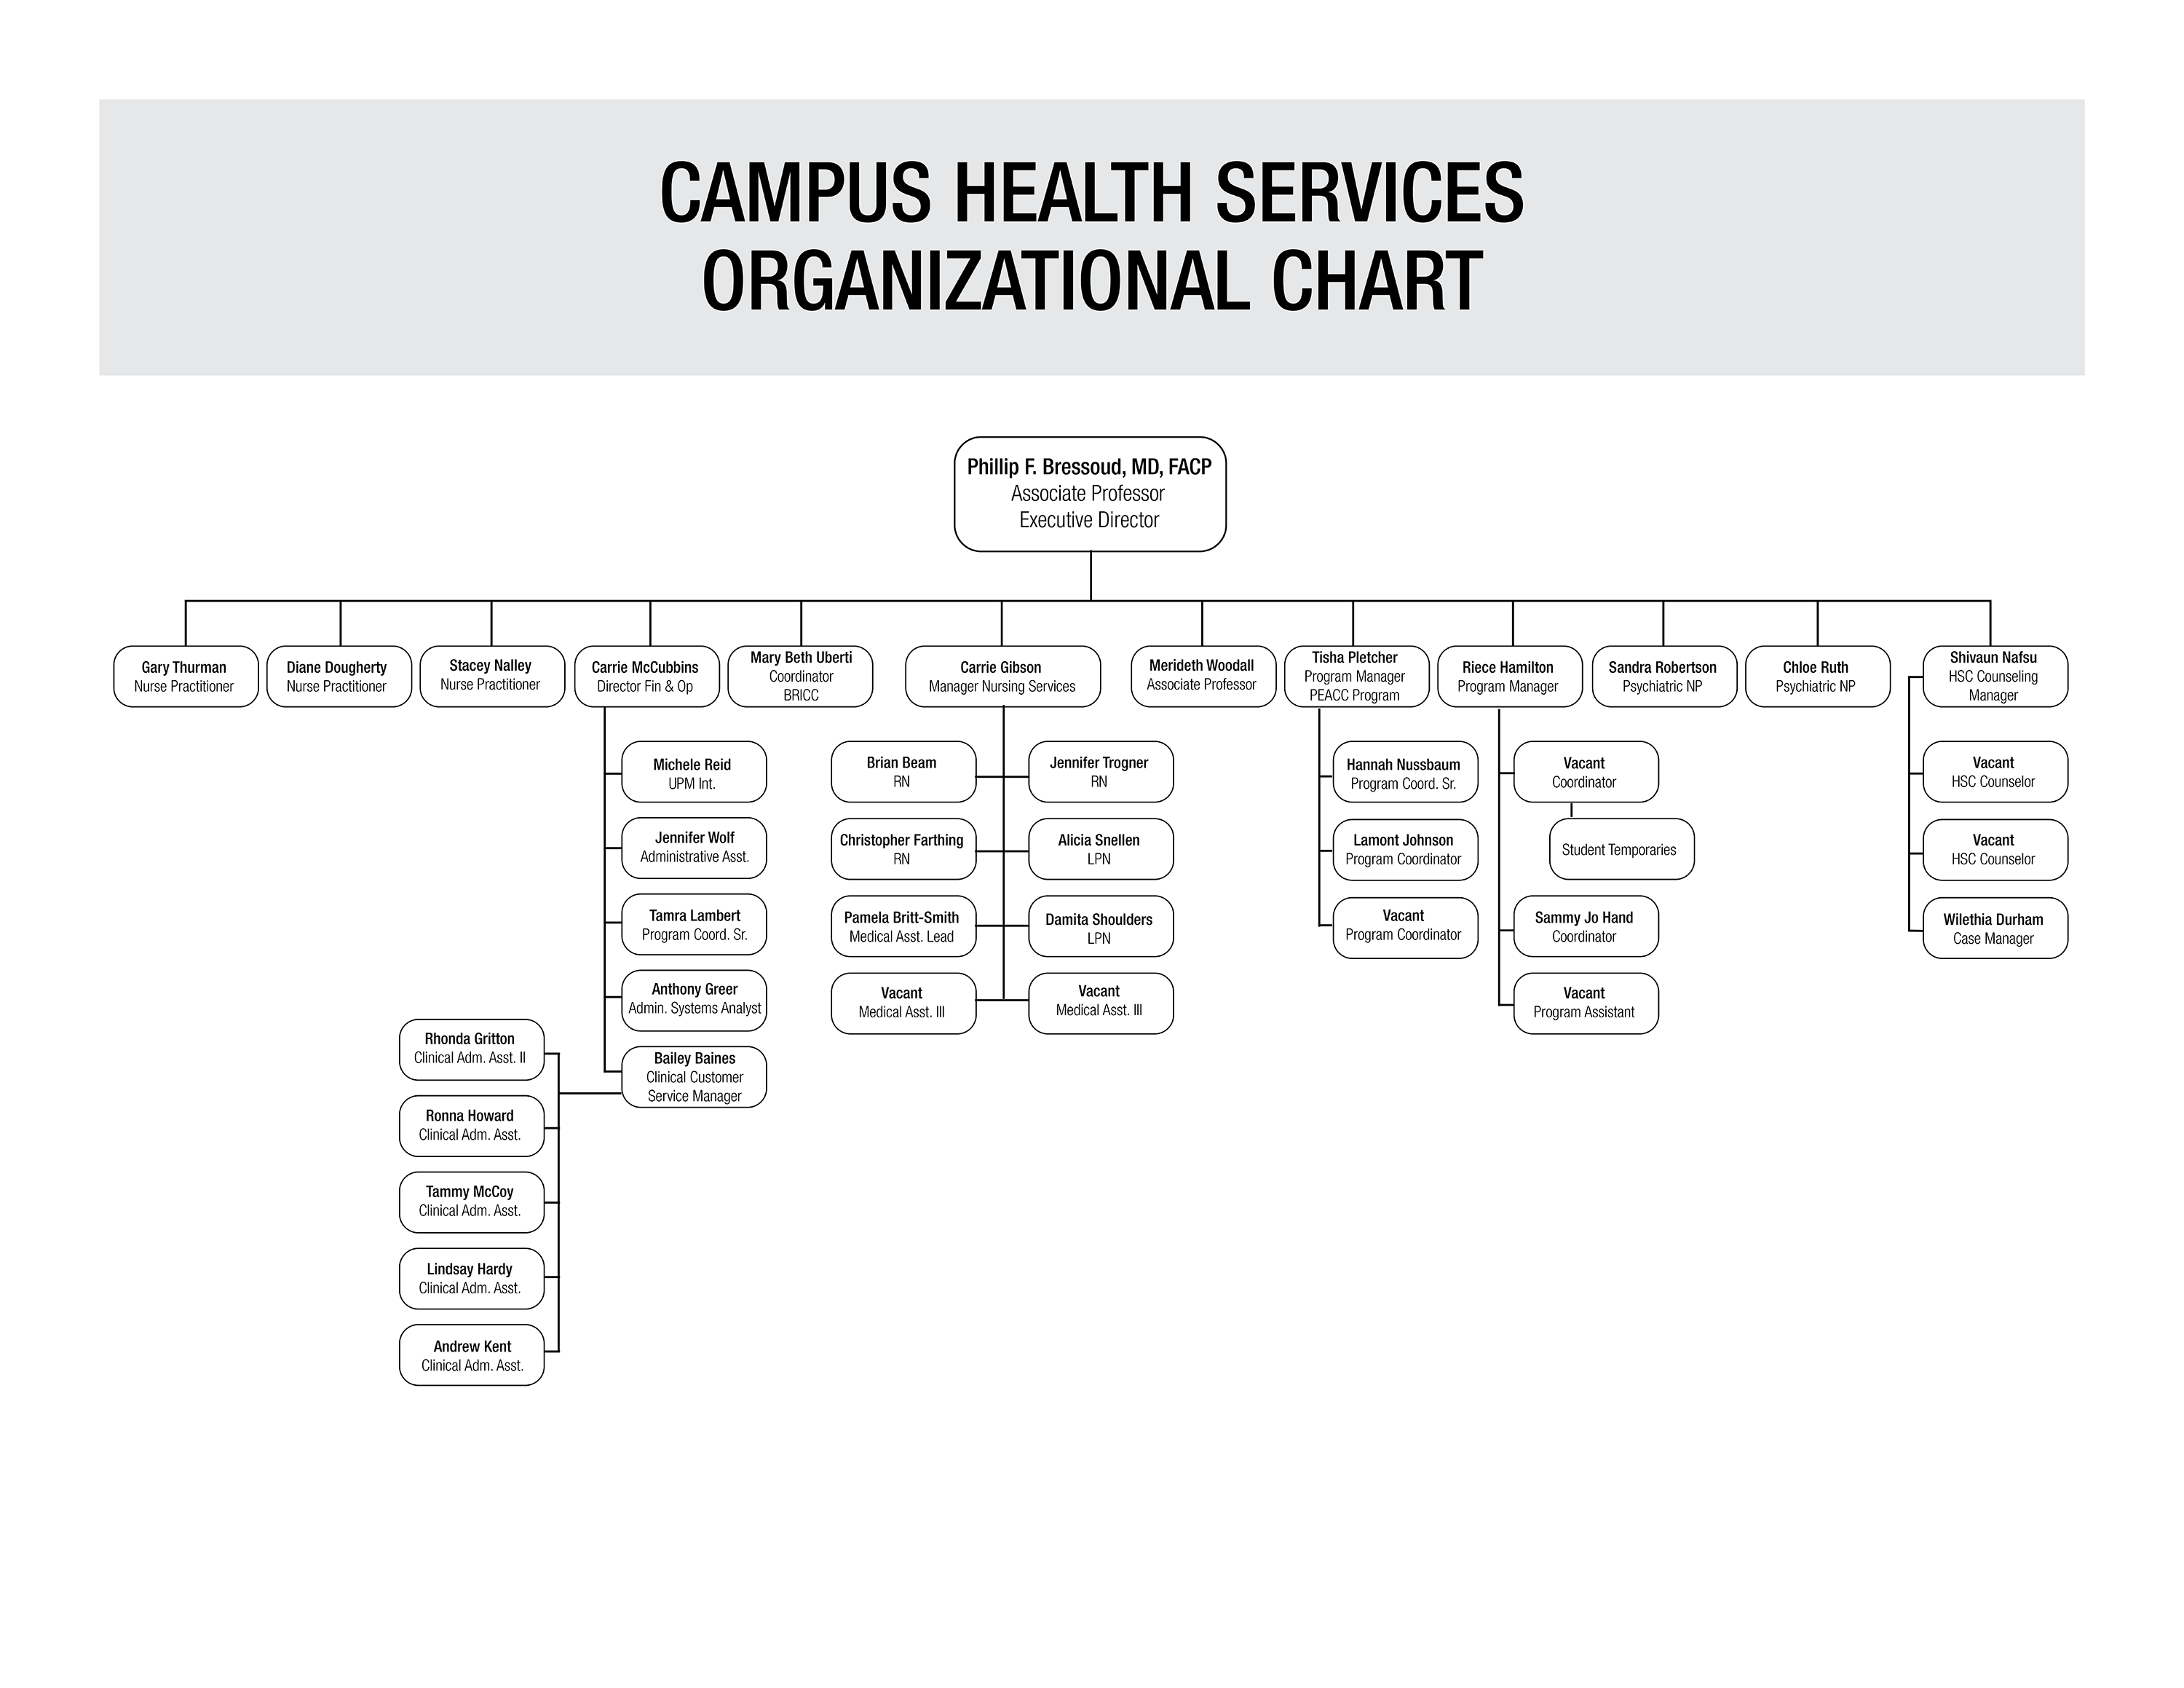 Department of Campus Health Services Organizational Chart